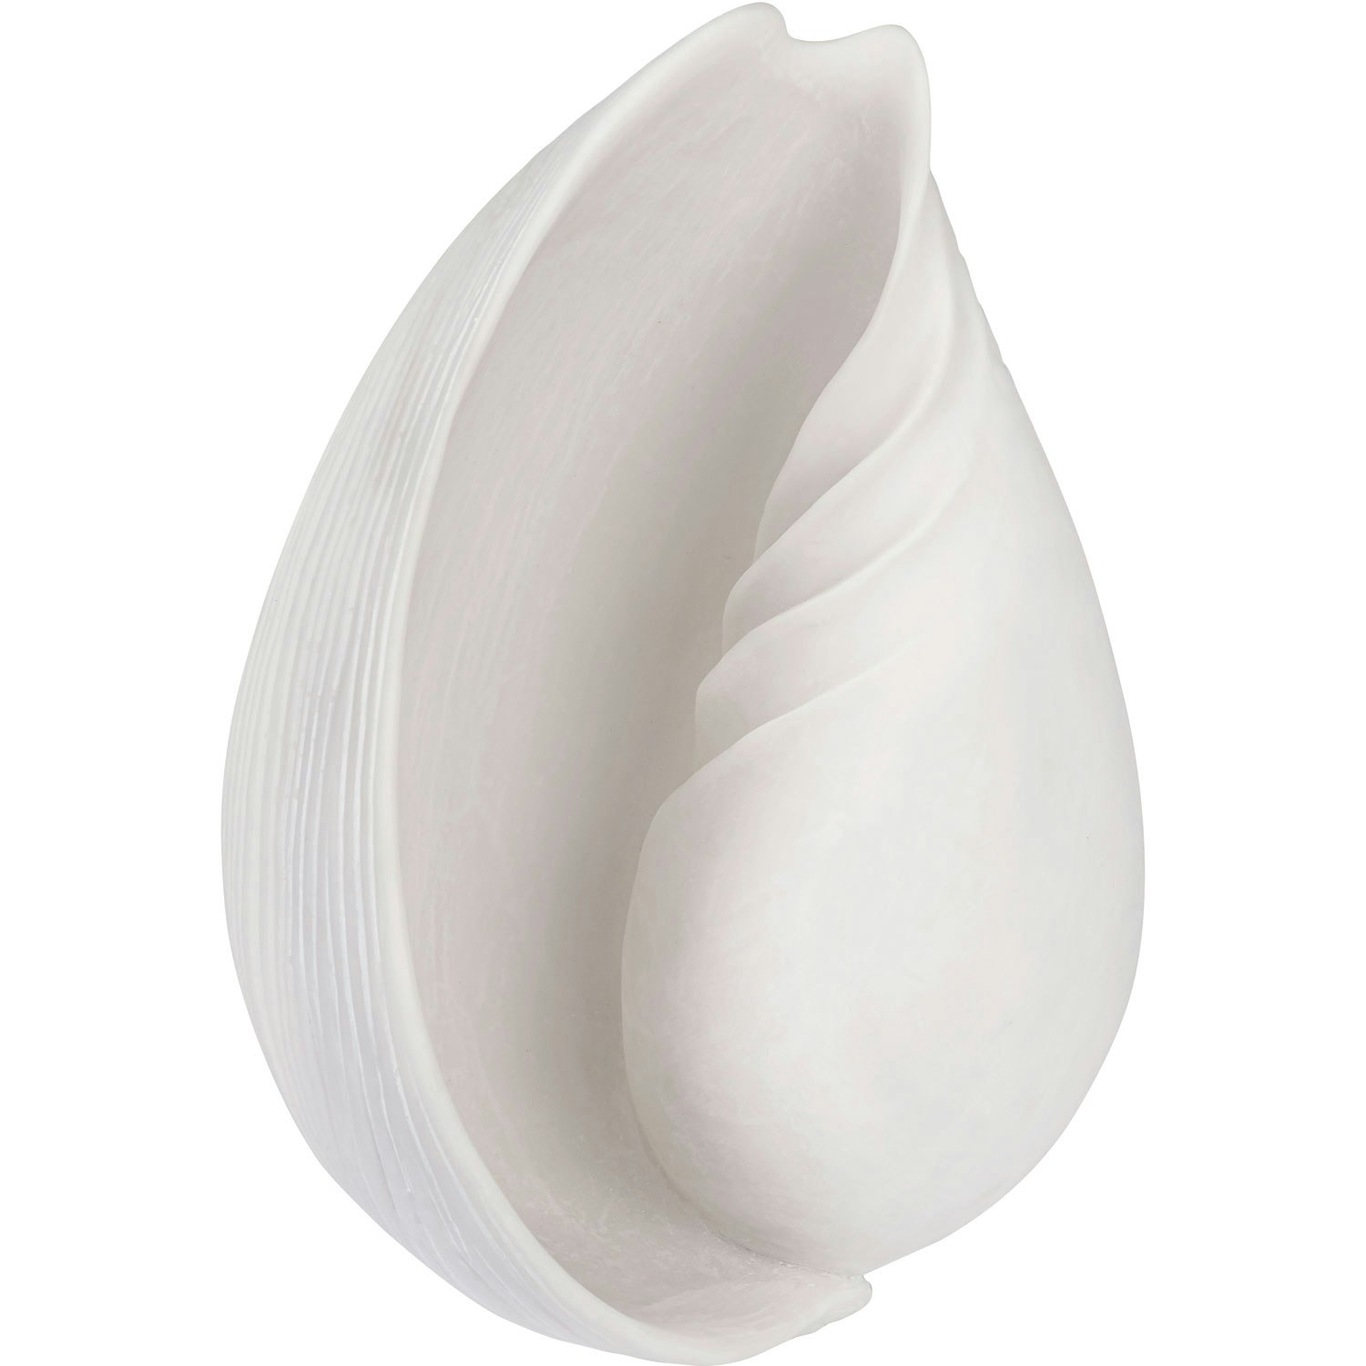 CONCH shell Decoration Off-white, Large